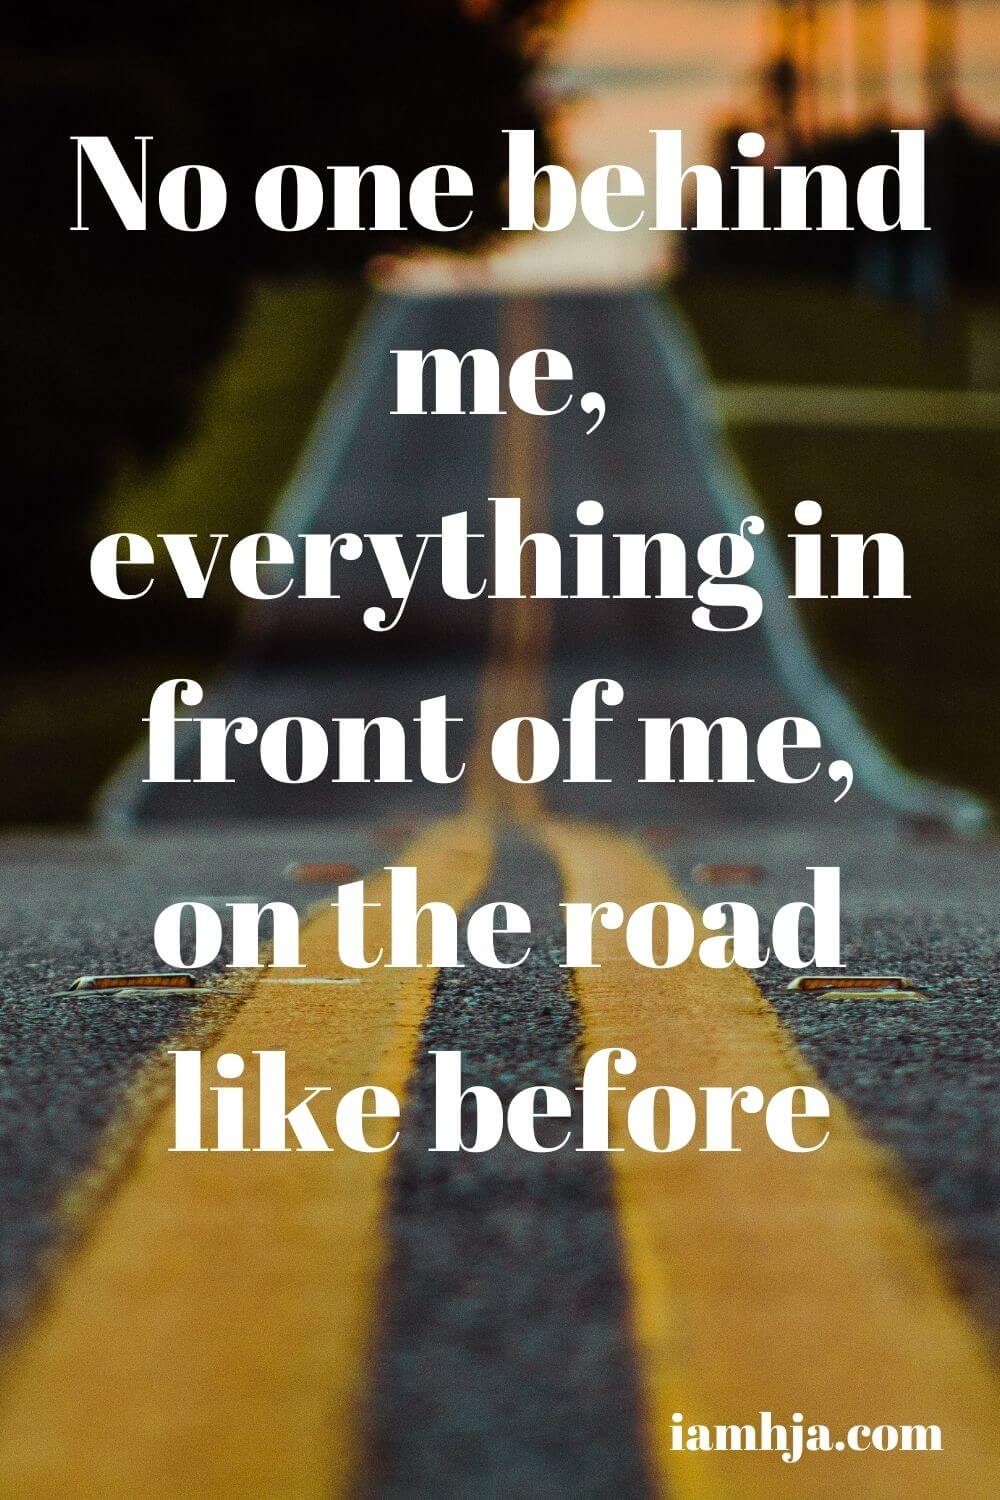 No one behind me, everything in front of me, on the road like before